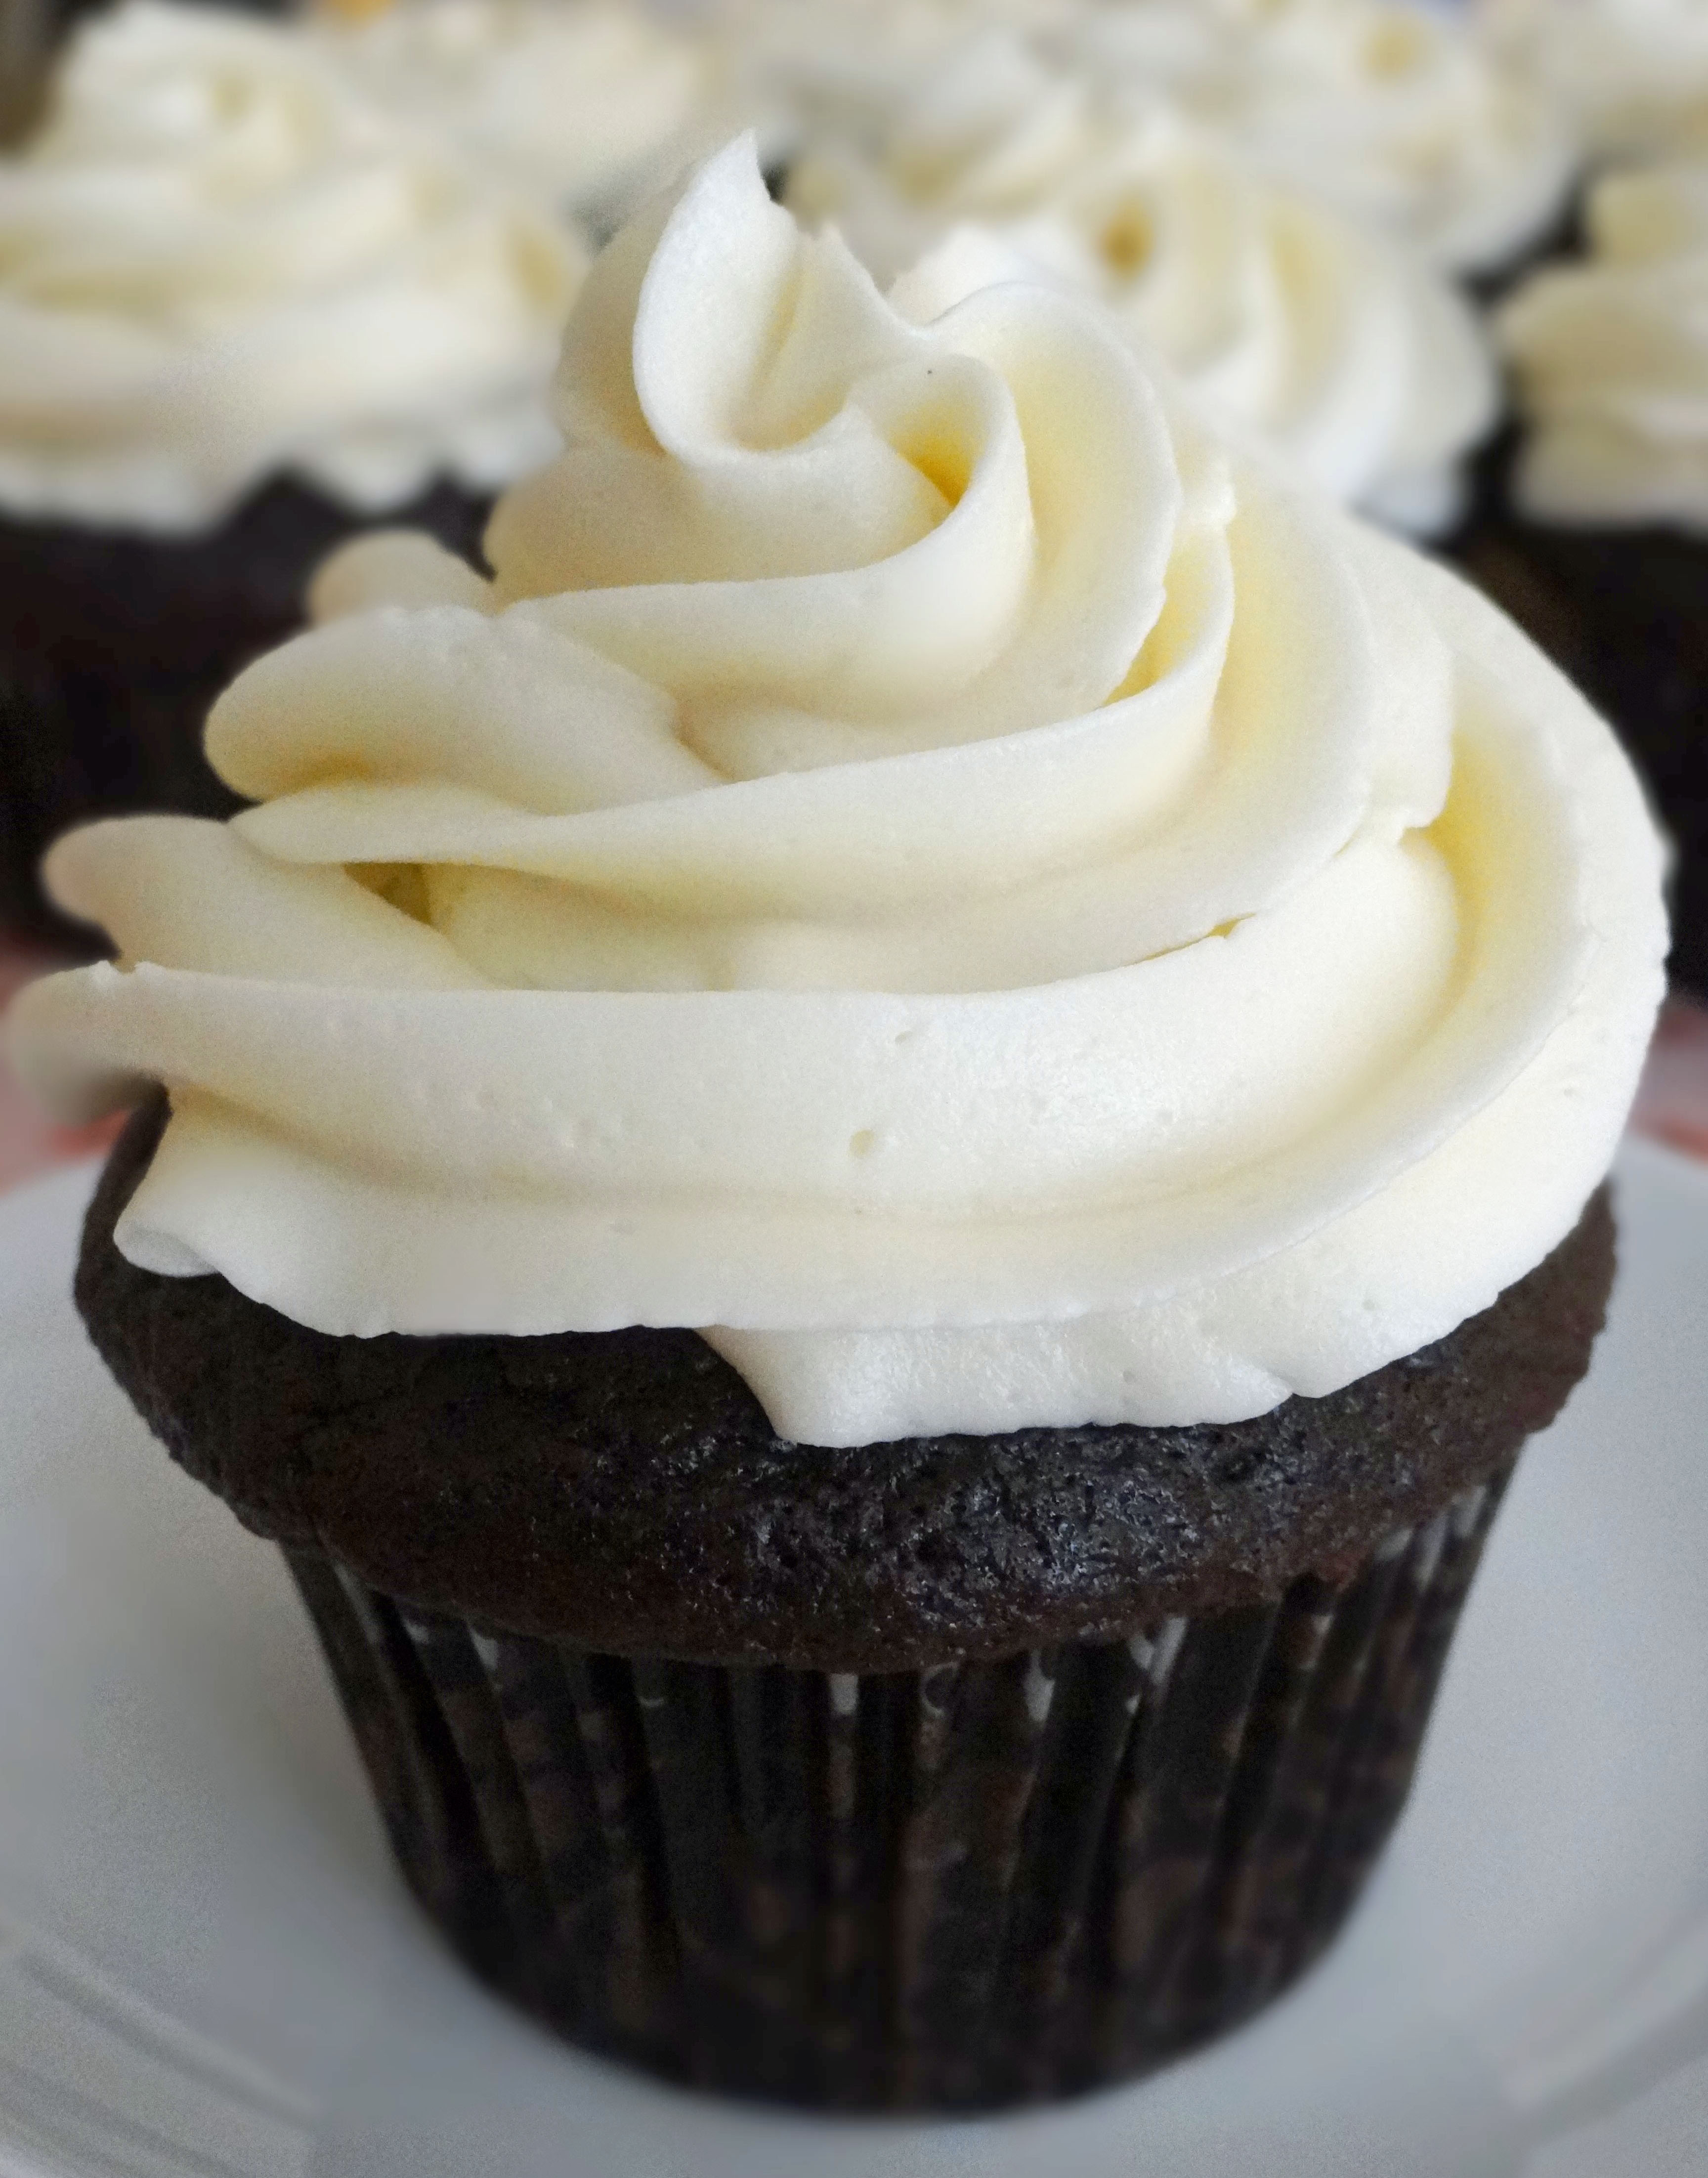 Cupcakes with Chocolate Frosting